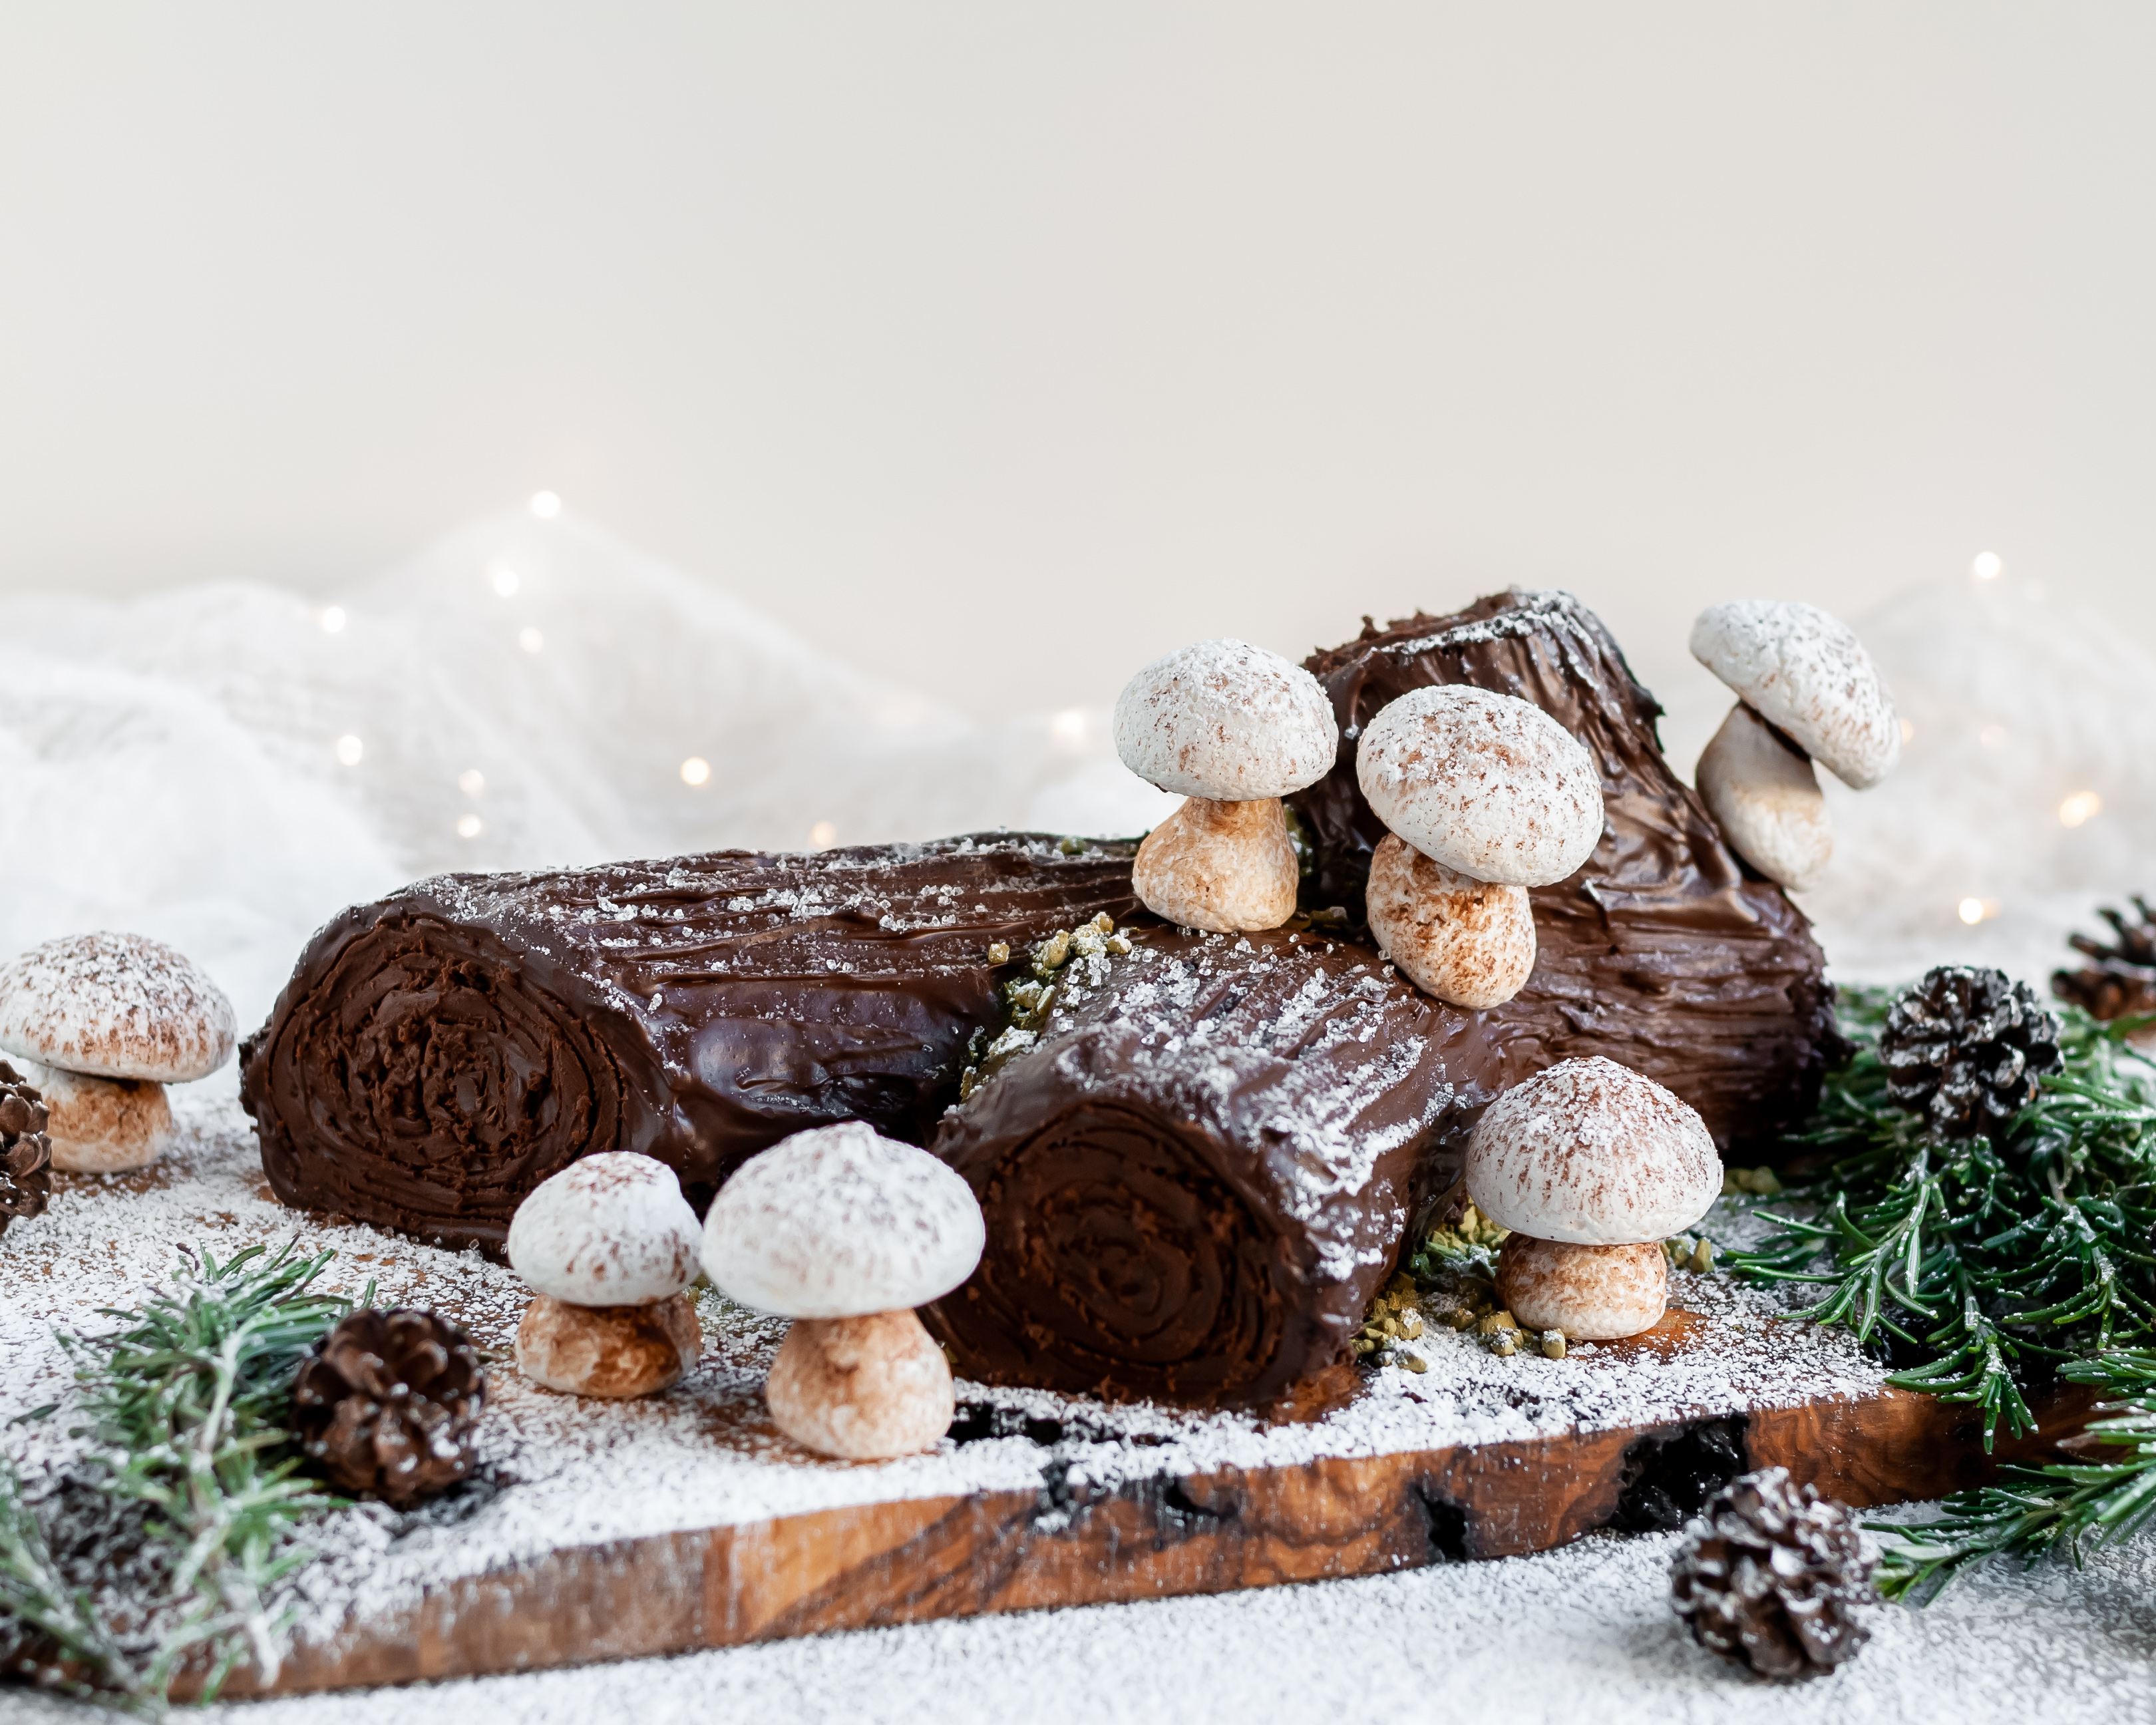 Vegan Chocolate Yule Log with Meringue Mushrooms served on a plank covered in icing sugar 